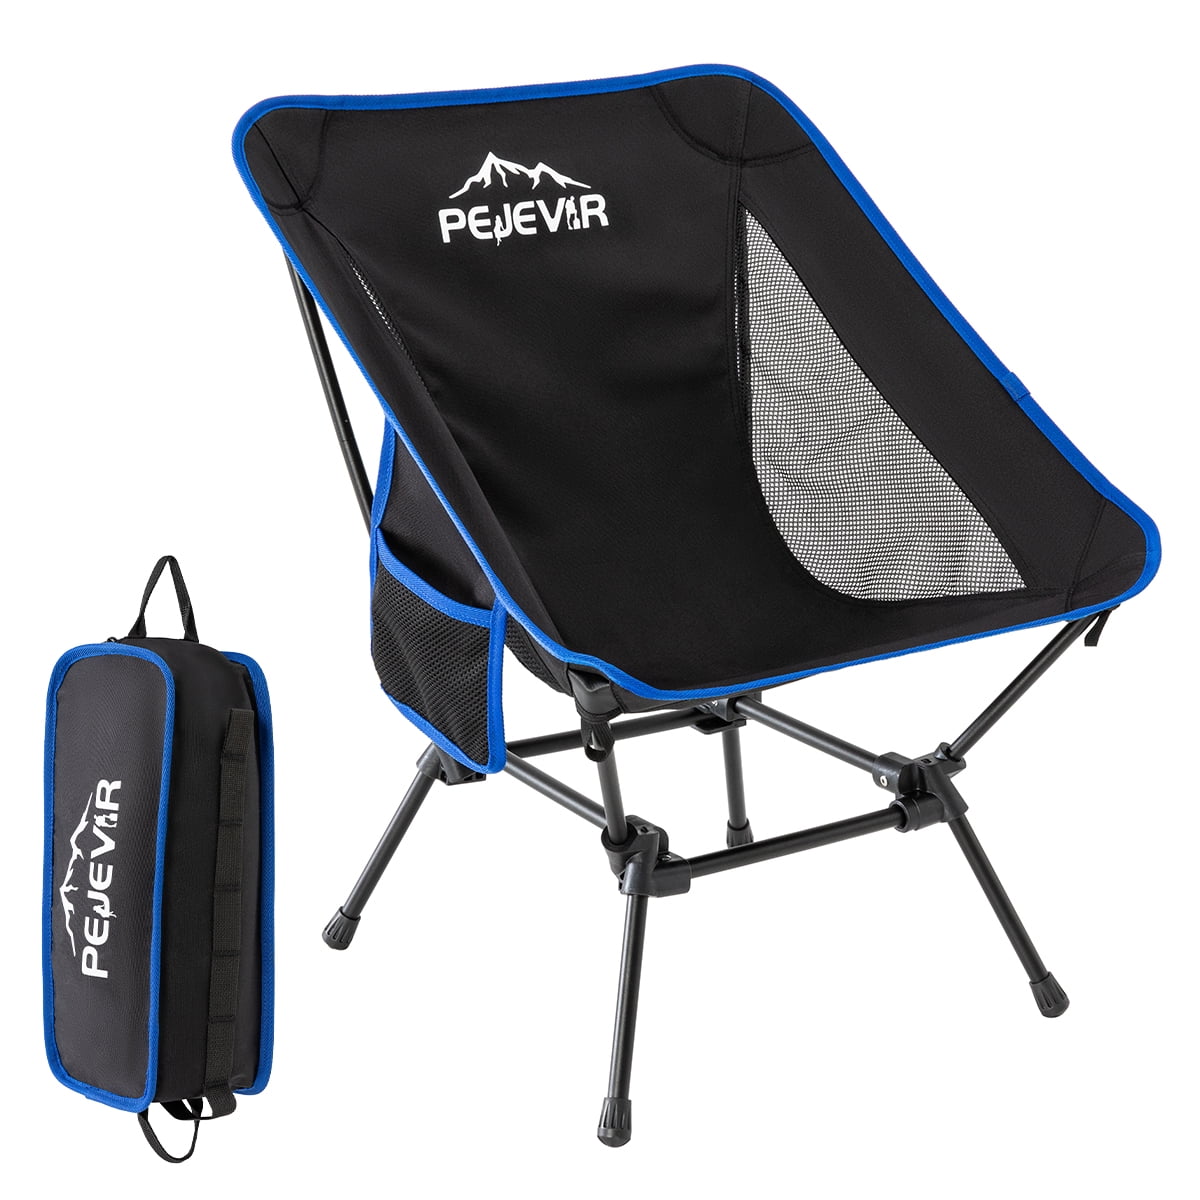 Outdoor Moon Chairs Folding Camping Barbecue Leisure Fishing Chair